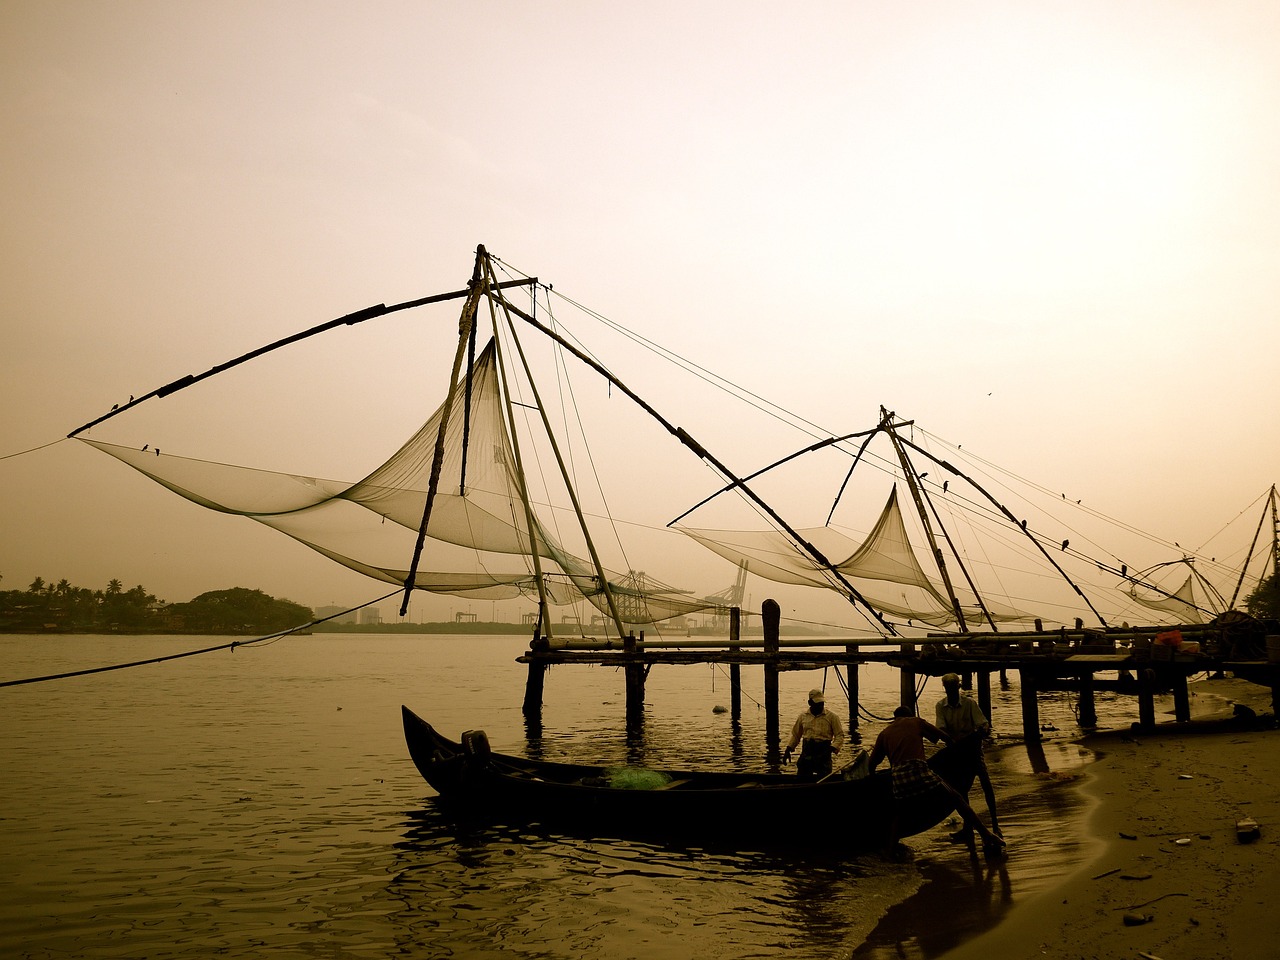 5-Day Family Adventure in Kochi and Beyond